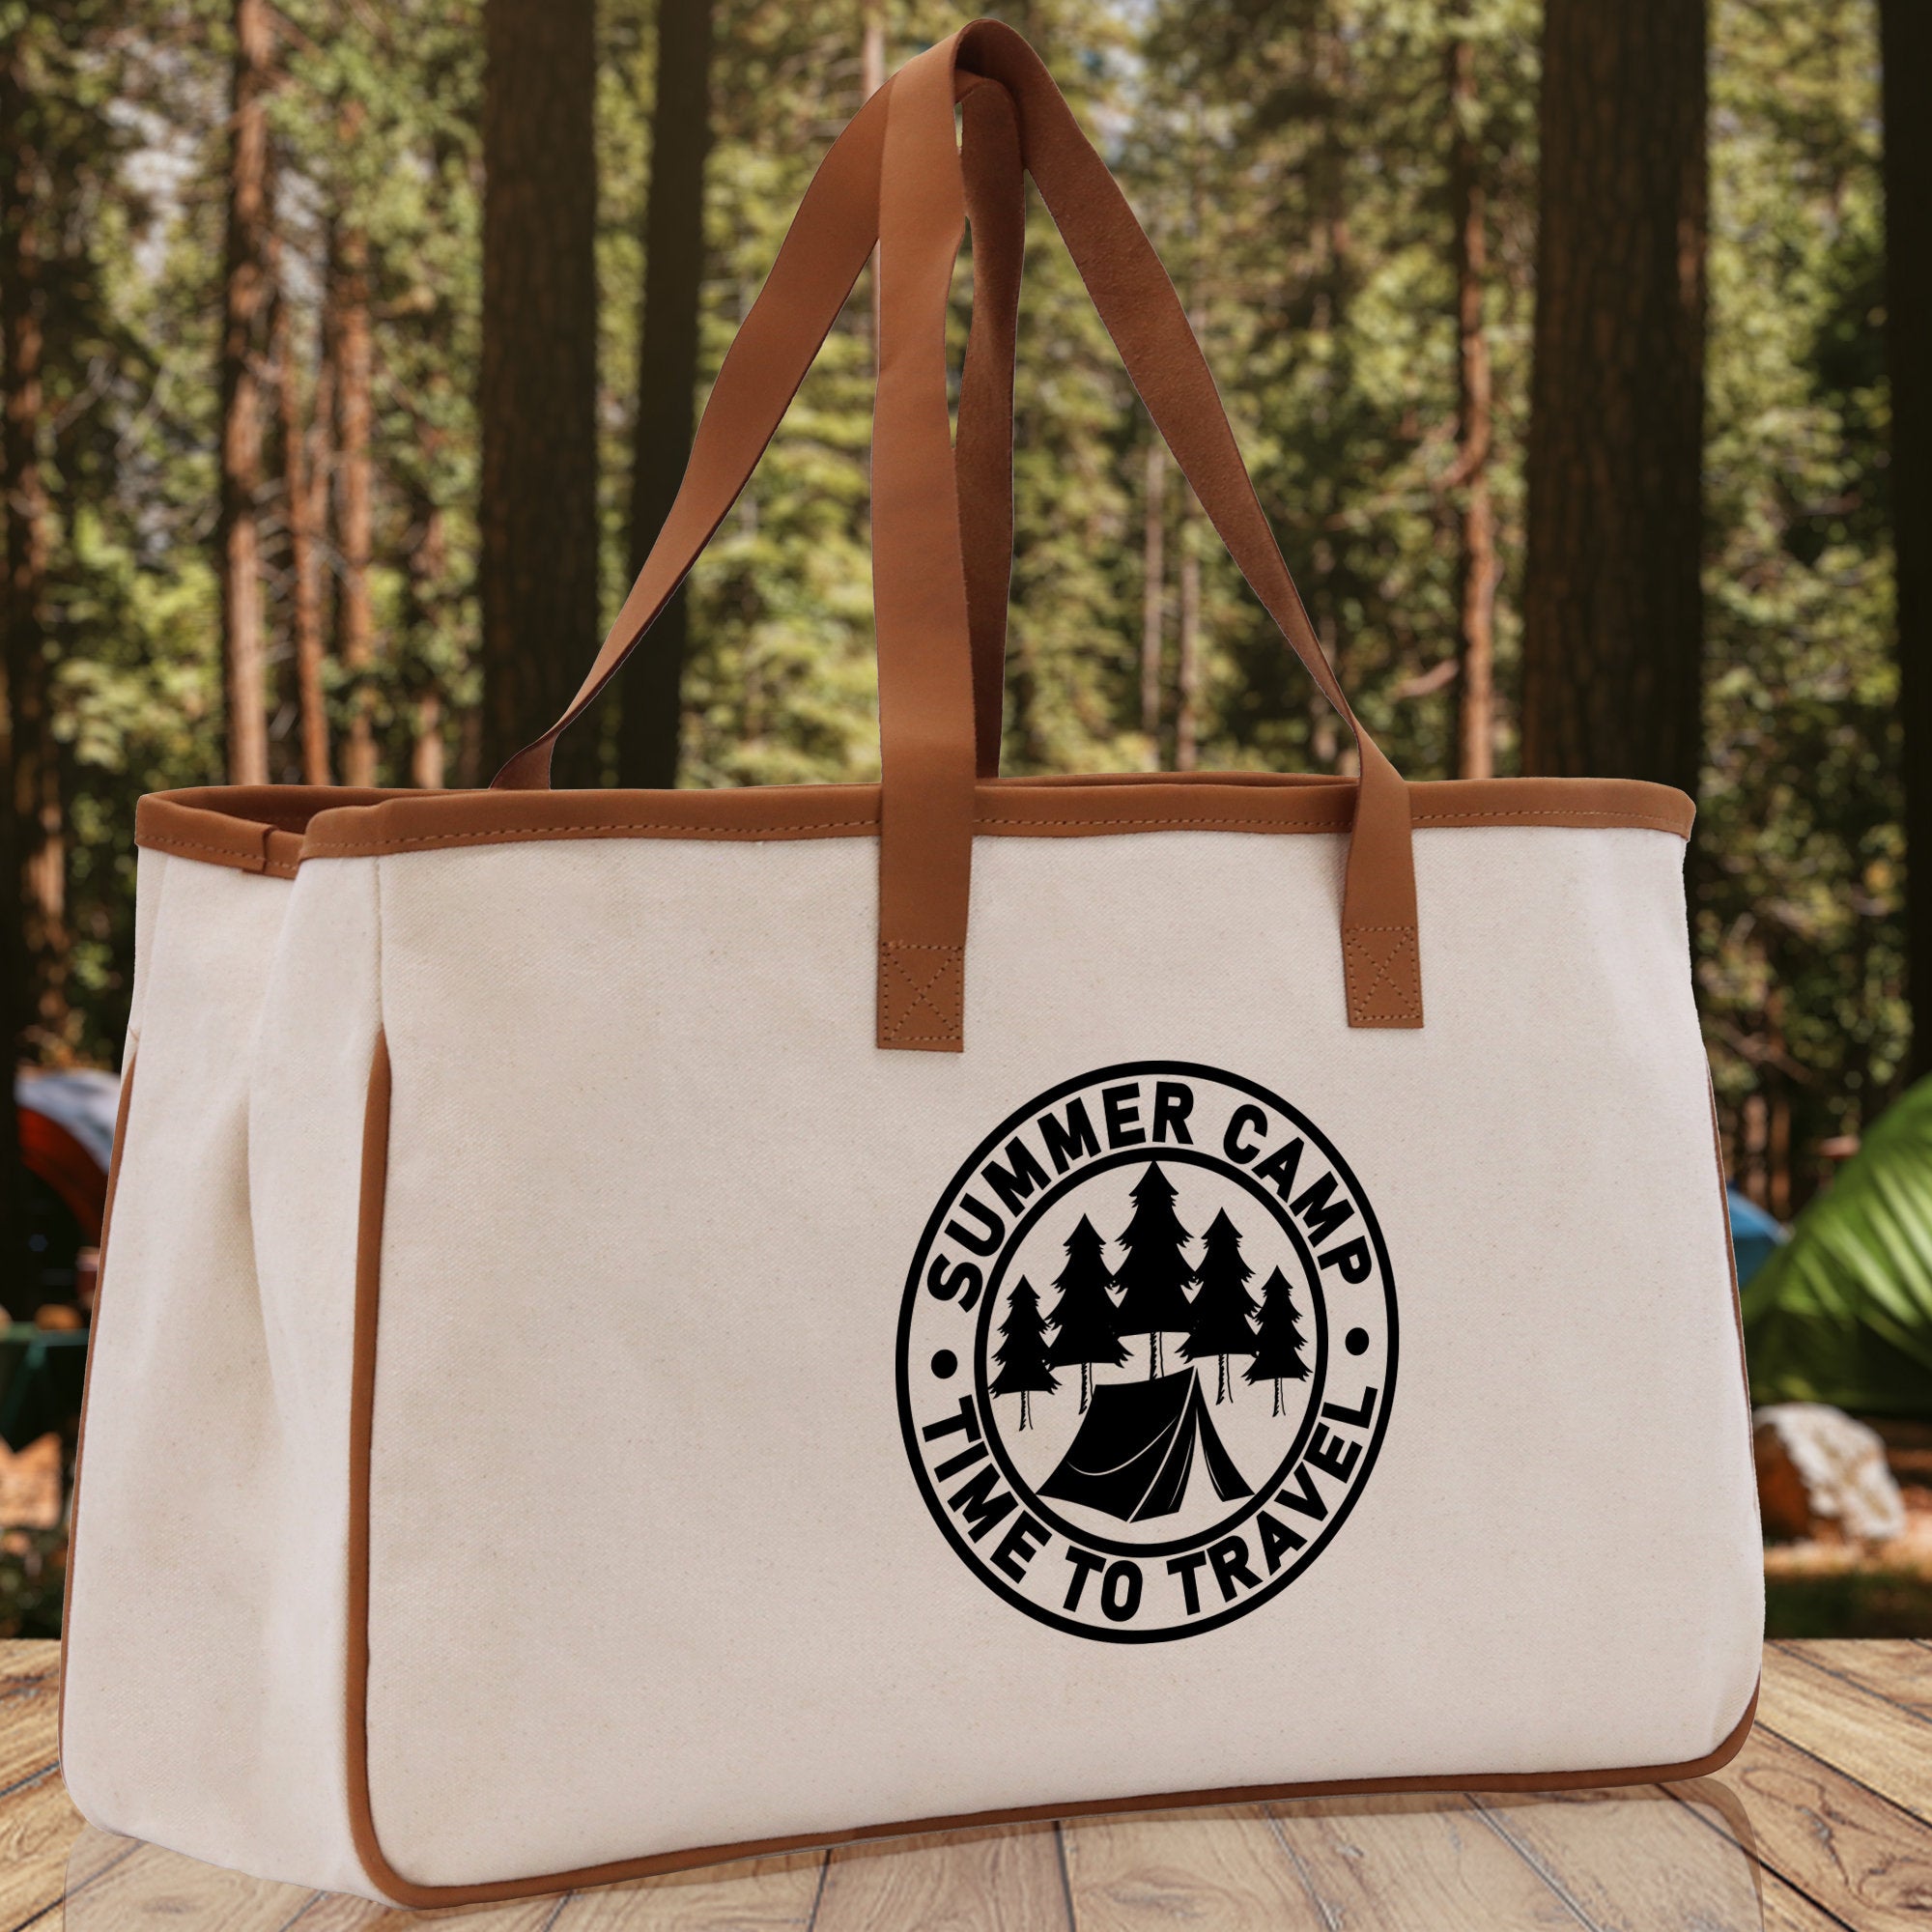 Summer Camp Time To Travel Cotton Canvas Chic Tote Bag Camping Tote Camping Lover Gift Tote Bag Outdoor Tote Weekender Tote Camper Tote